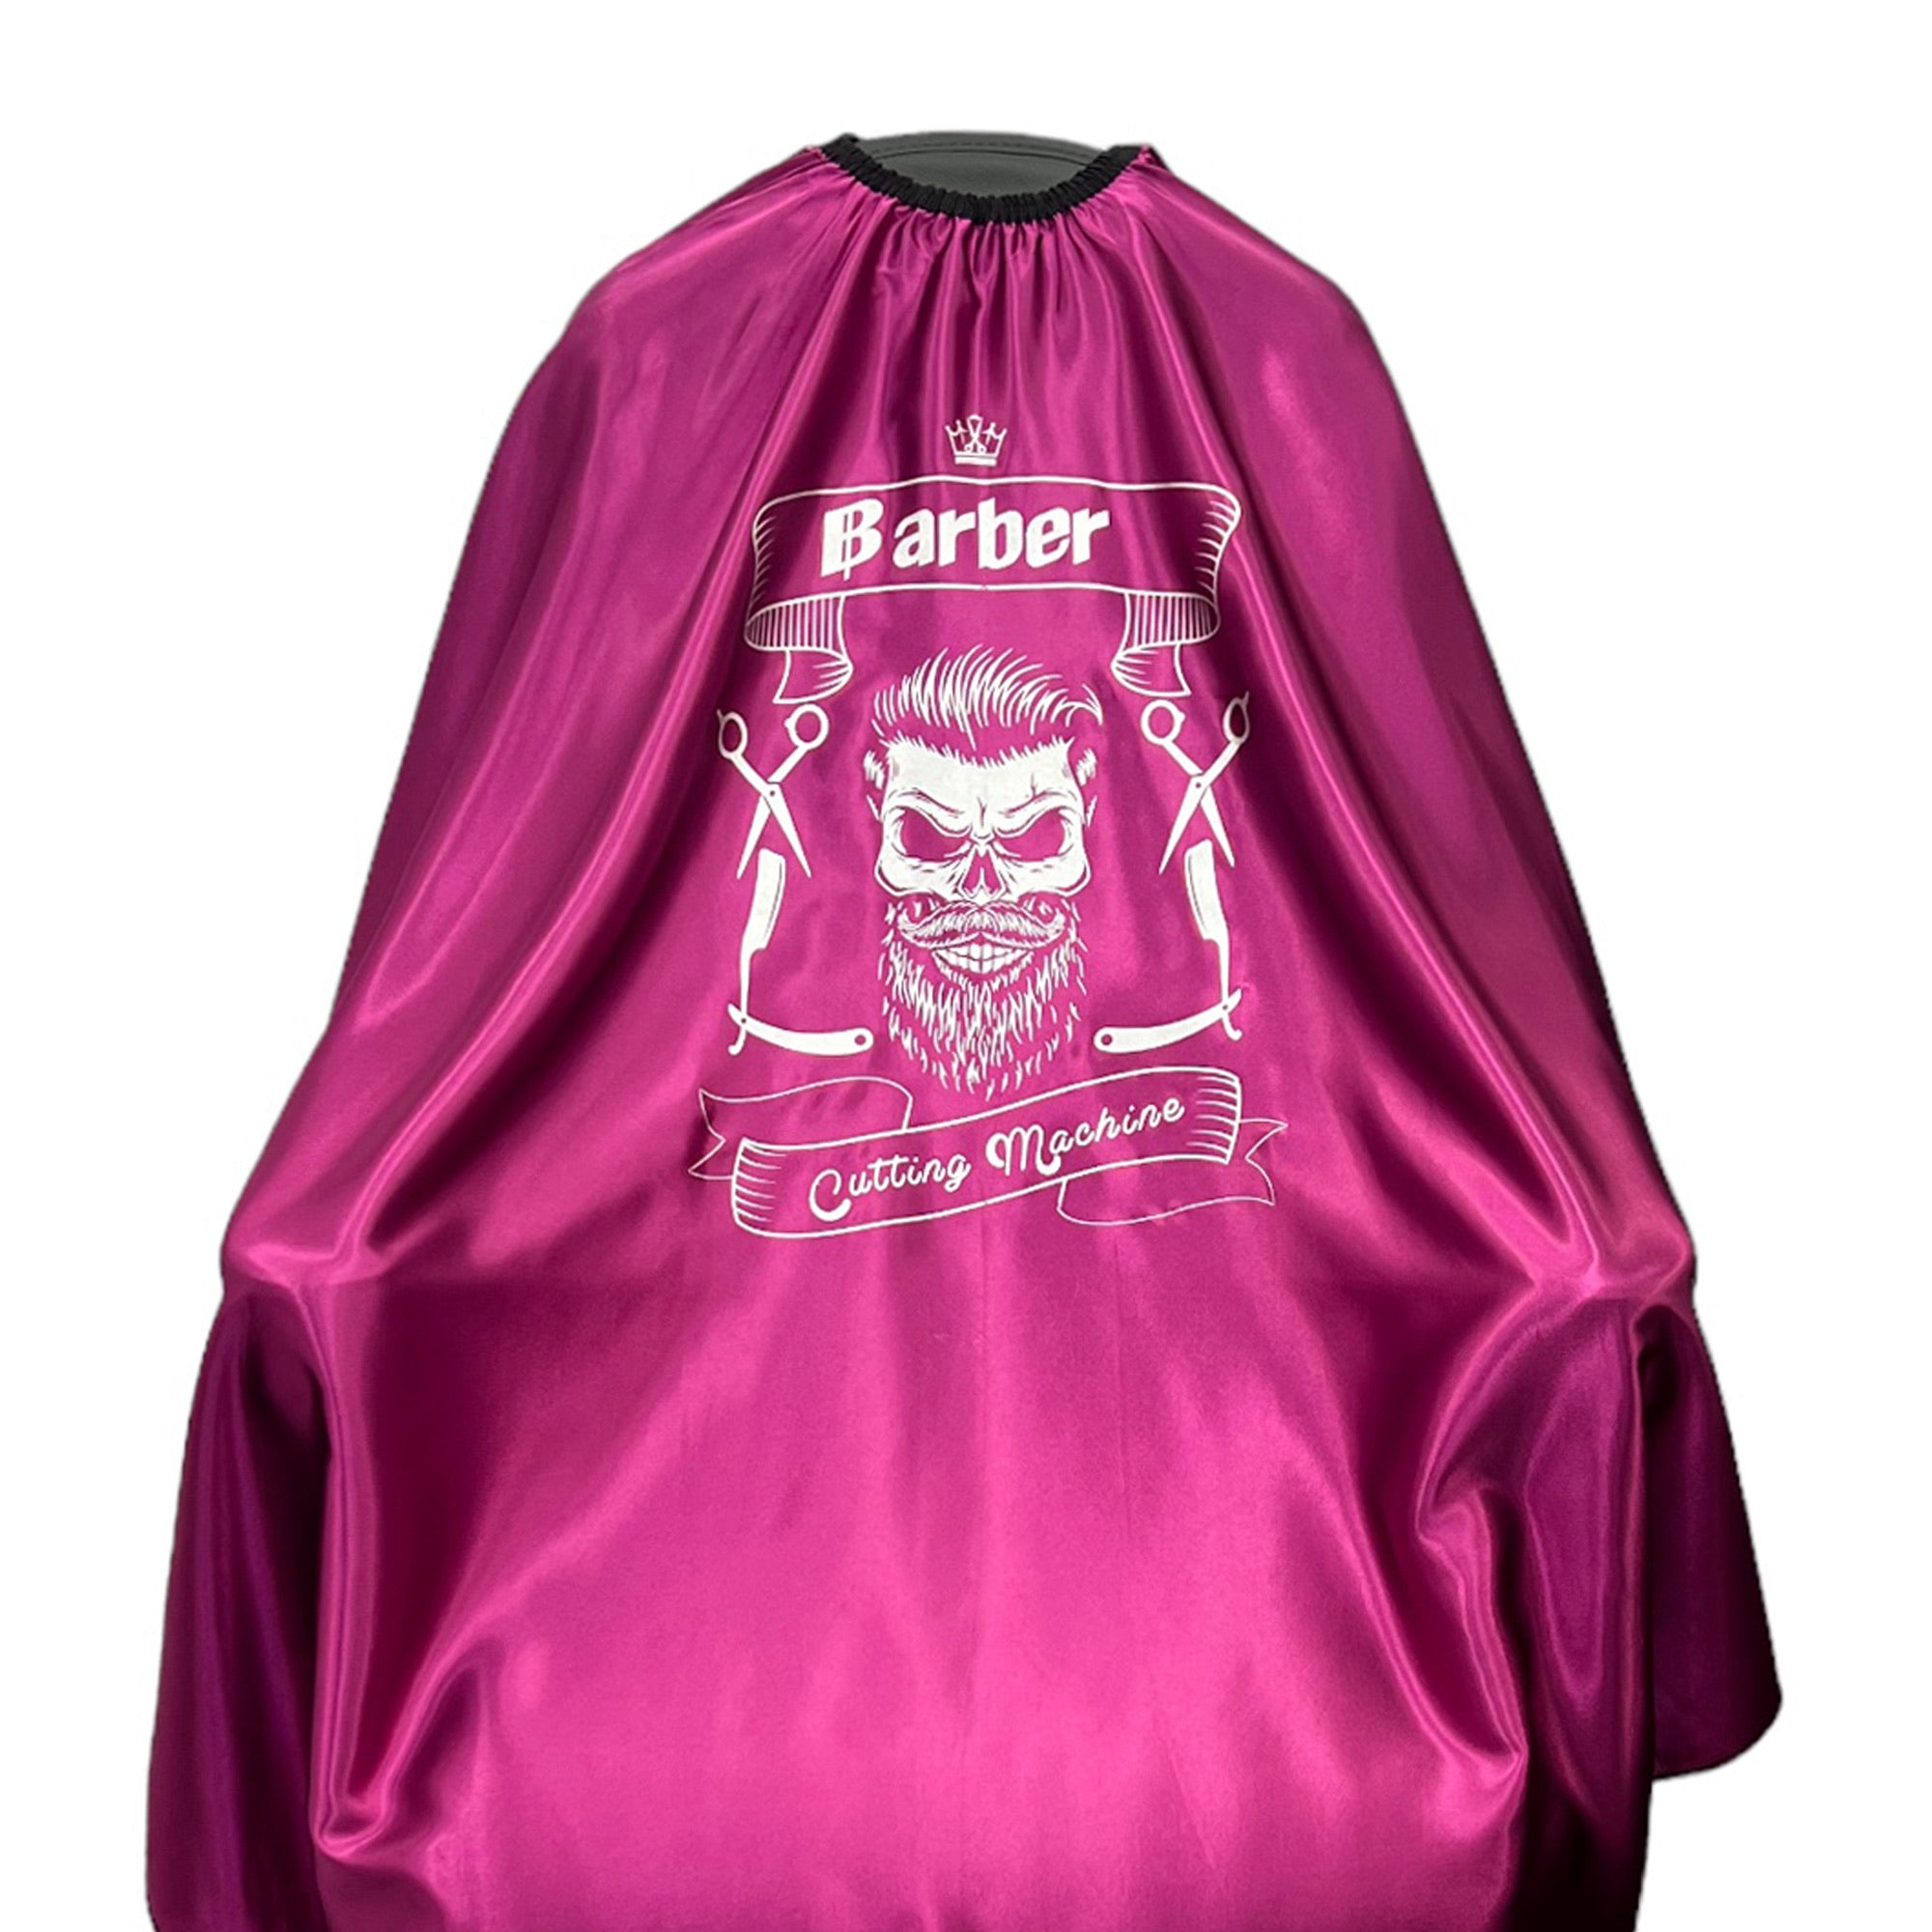 Gabri - Barber Hairdressing Hair Cutting Capes & Gowns Skull Pattern (Fuchsia Pink)